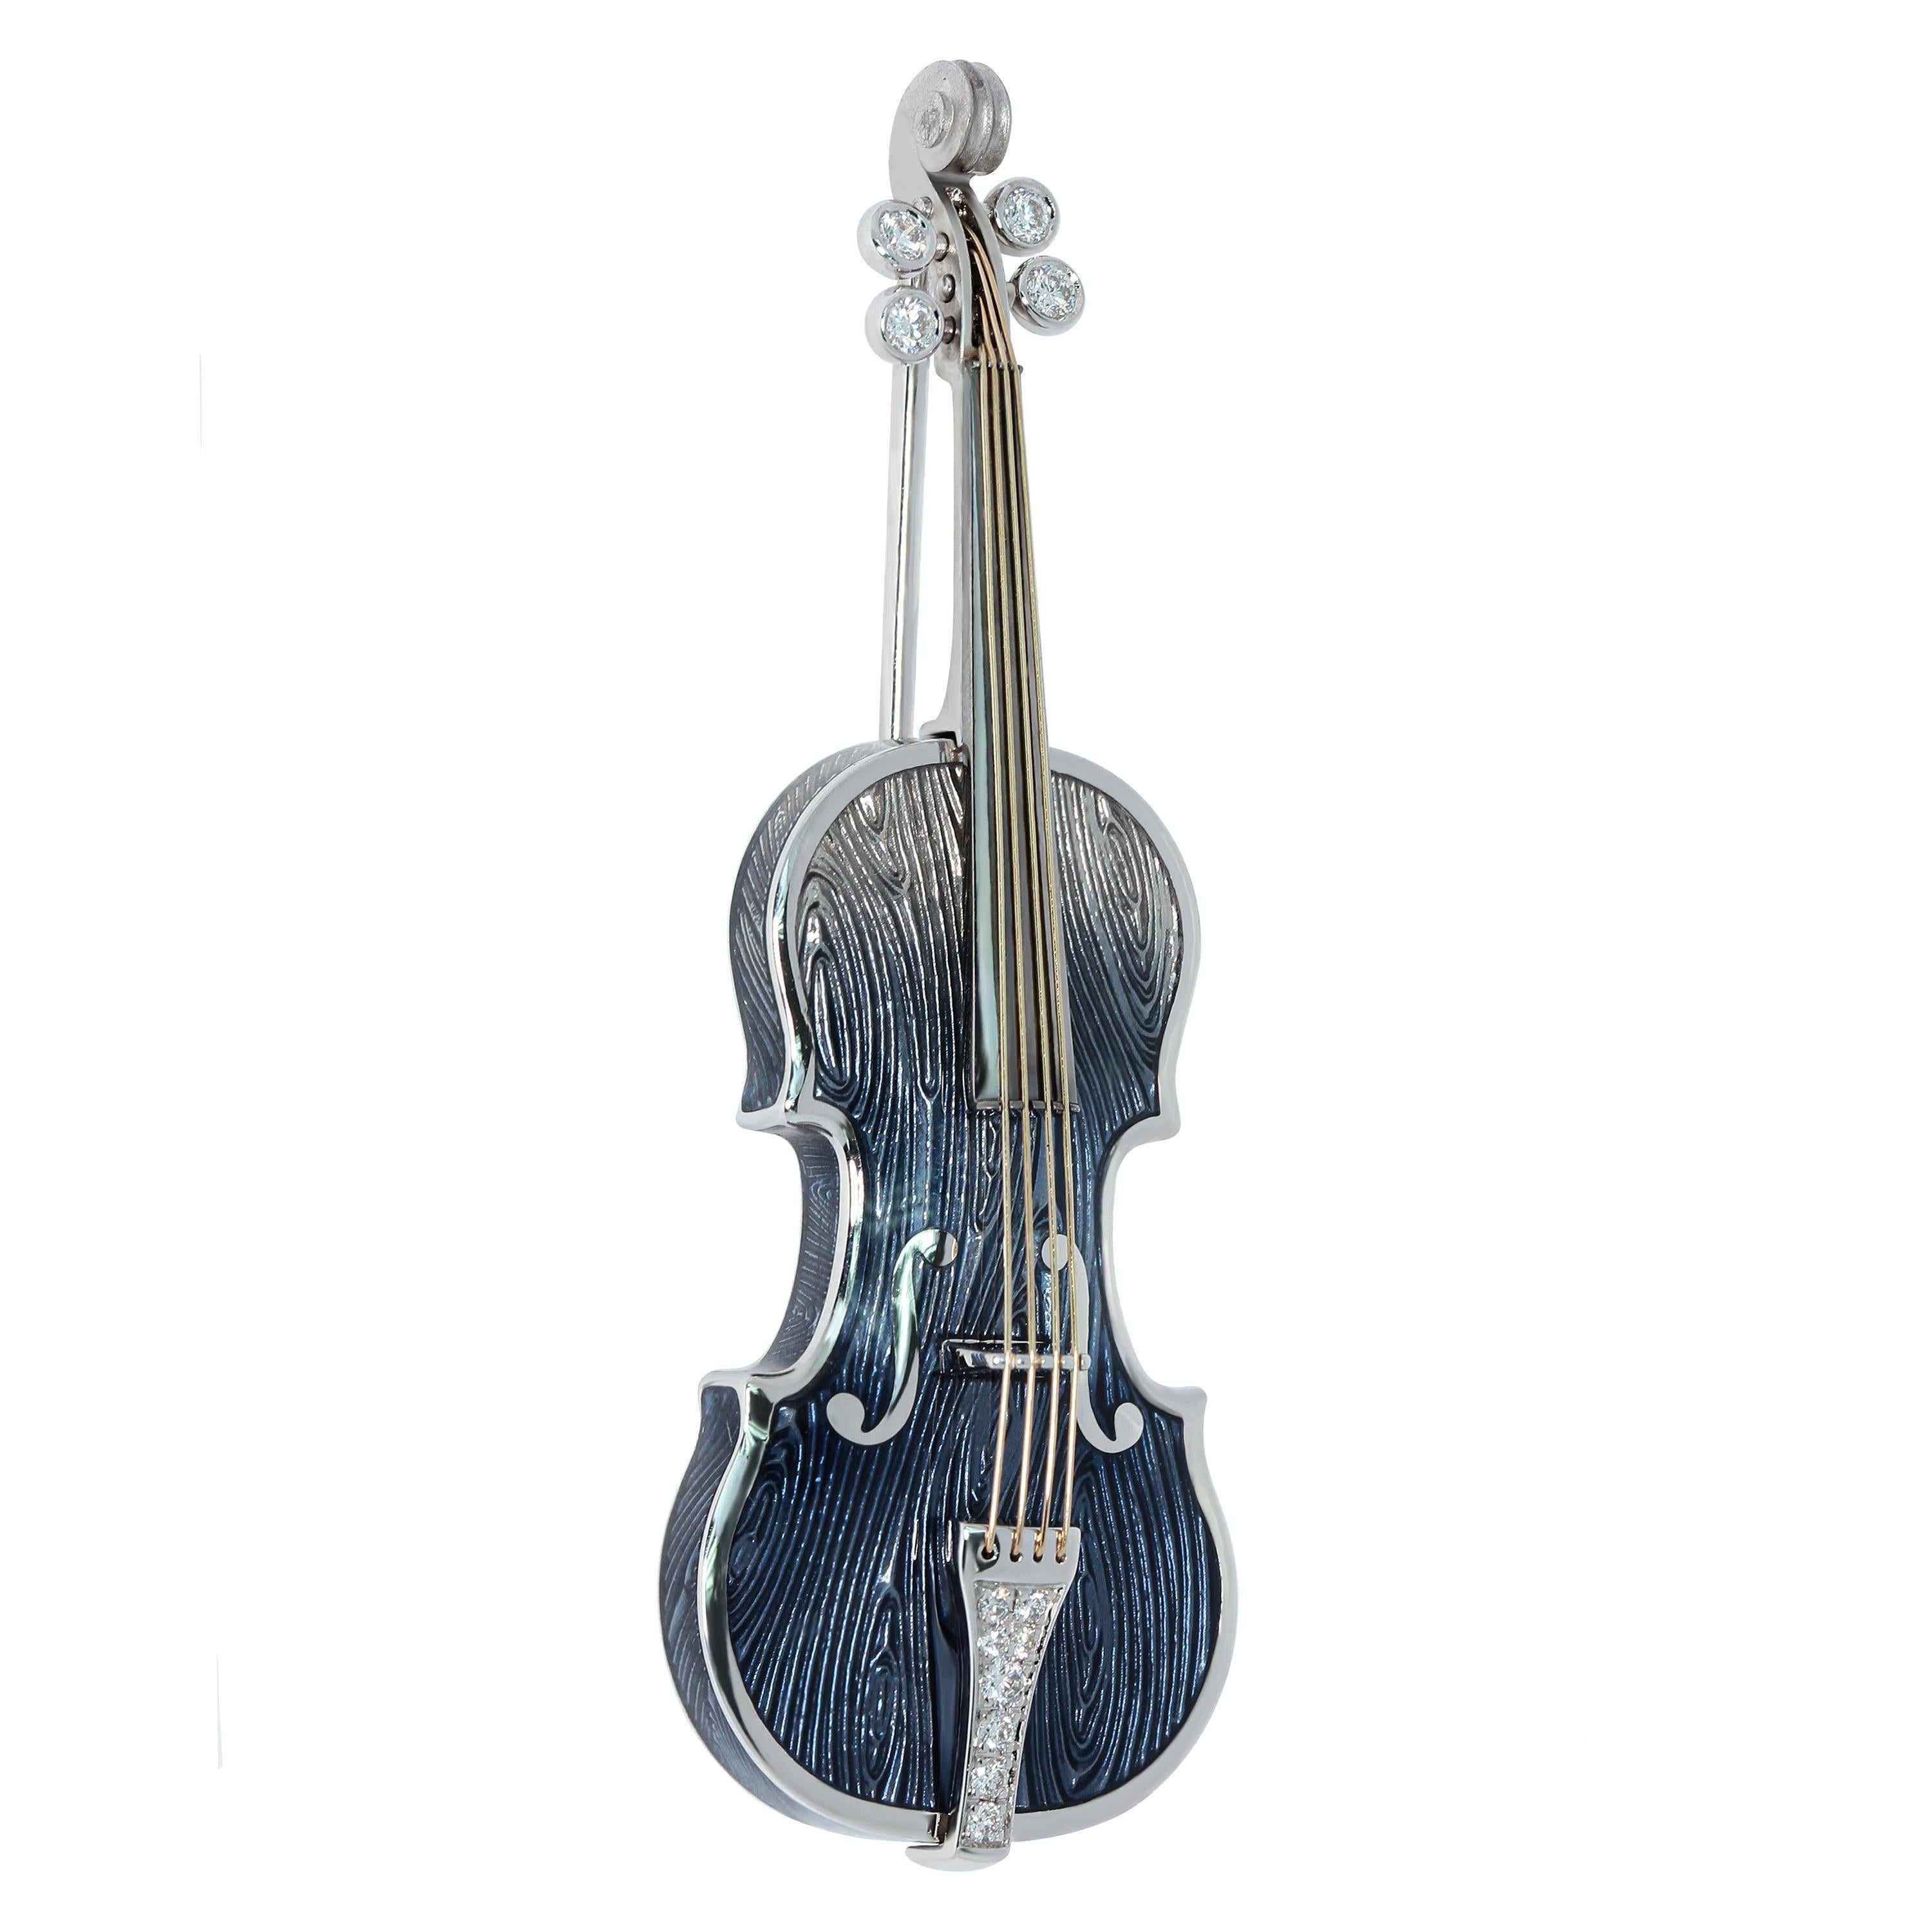 Diamonds Enamel 18 Karat White Gold Blue Violin Brooch
Violin is probably the best known and most widely distributed musical instrument in the world.
And it’s form is completely striking with its grace.
Its strings are hitched to tuning pegs and a